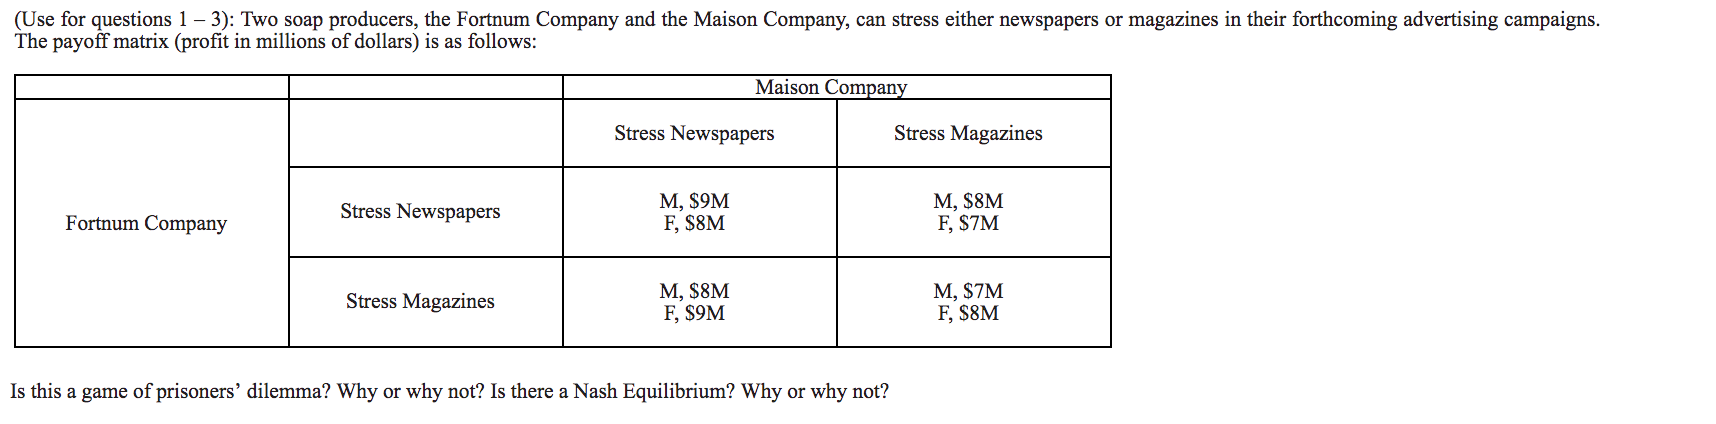 (Use for questions 1 - 3): Two soap producers, the Fortnum Company and the Maison Company, can stress either newspapers or magazines in their forthcoming advertising campaigns
The payoff matrix (profit in millions of dollars) is as follows:
Maison Company
Stress Magazines
Stress Newspapers
М, $8M
F, $7M
M, $9M
F, $8M
Stress Newspapers
Fortnum Company
М, $7M
F, $8M
М, S8M
F, S9M
Stress Magazines
Is this a game of prisoners' dilemma? Why or why not? Is there a Nash Equilibrium? Why or why not?
